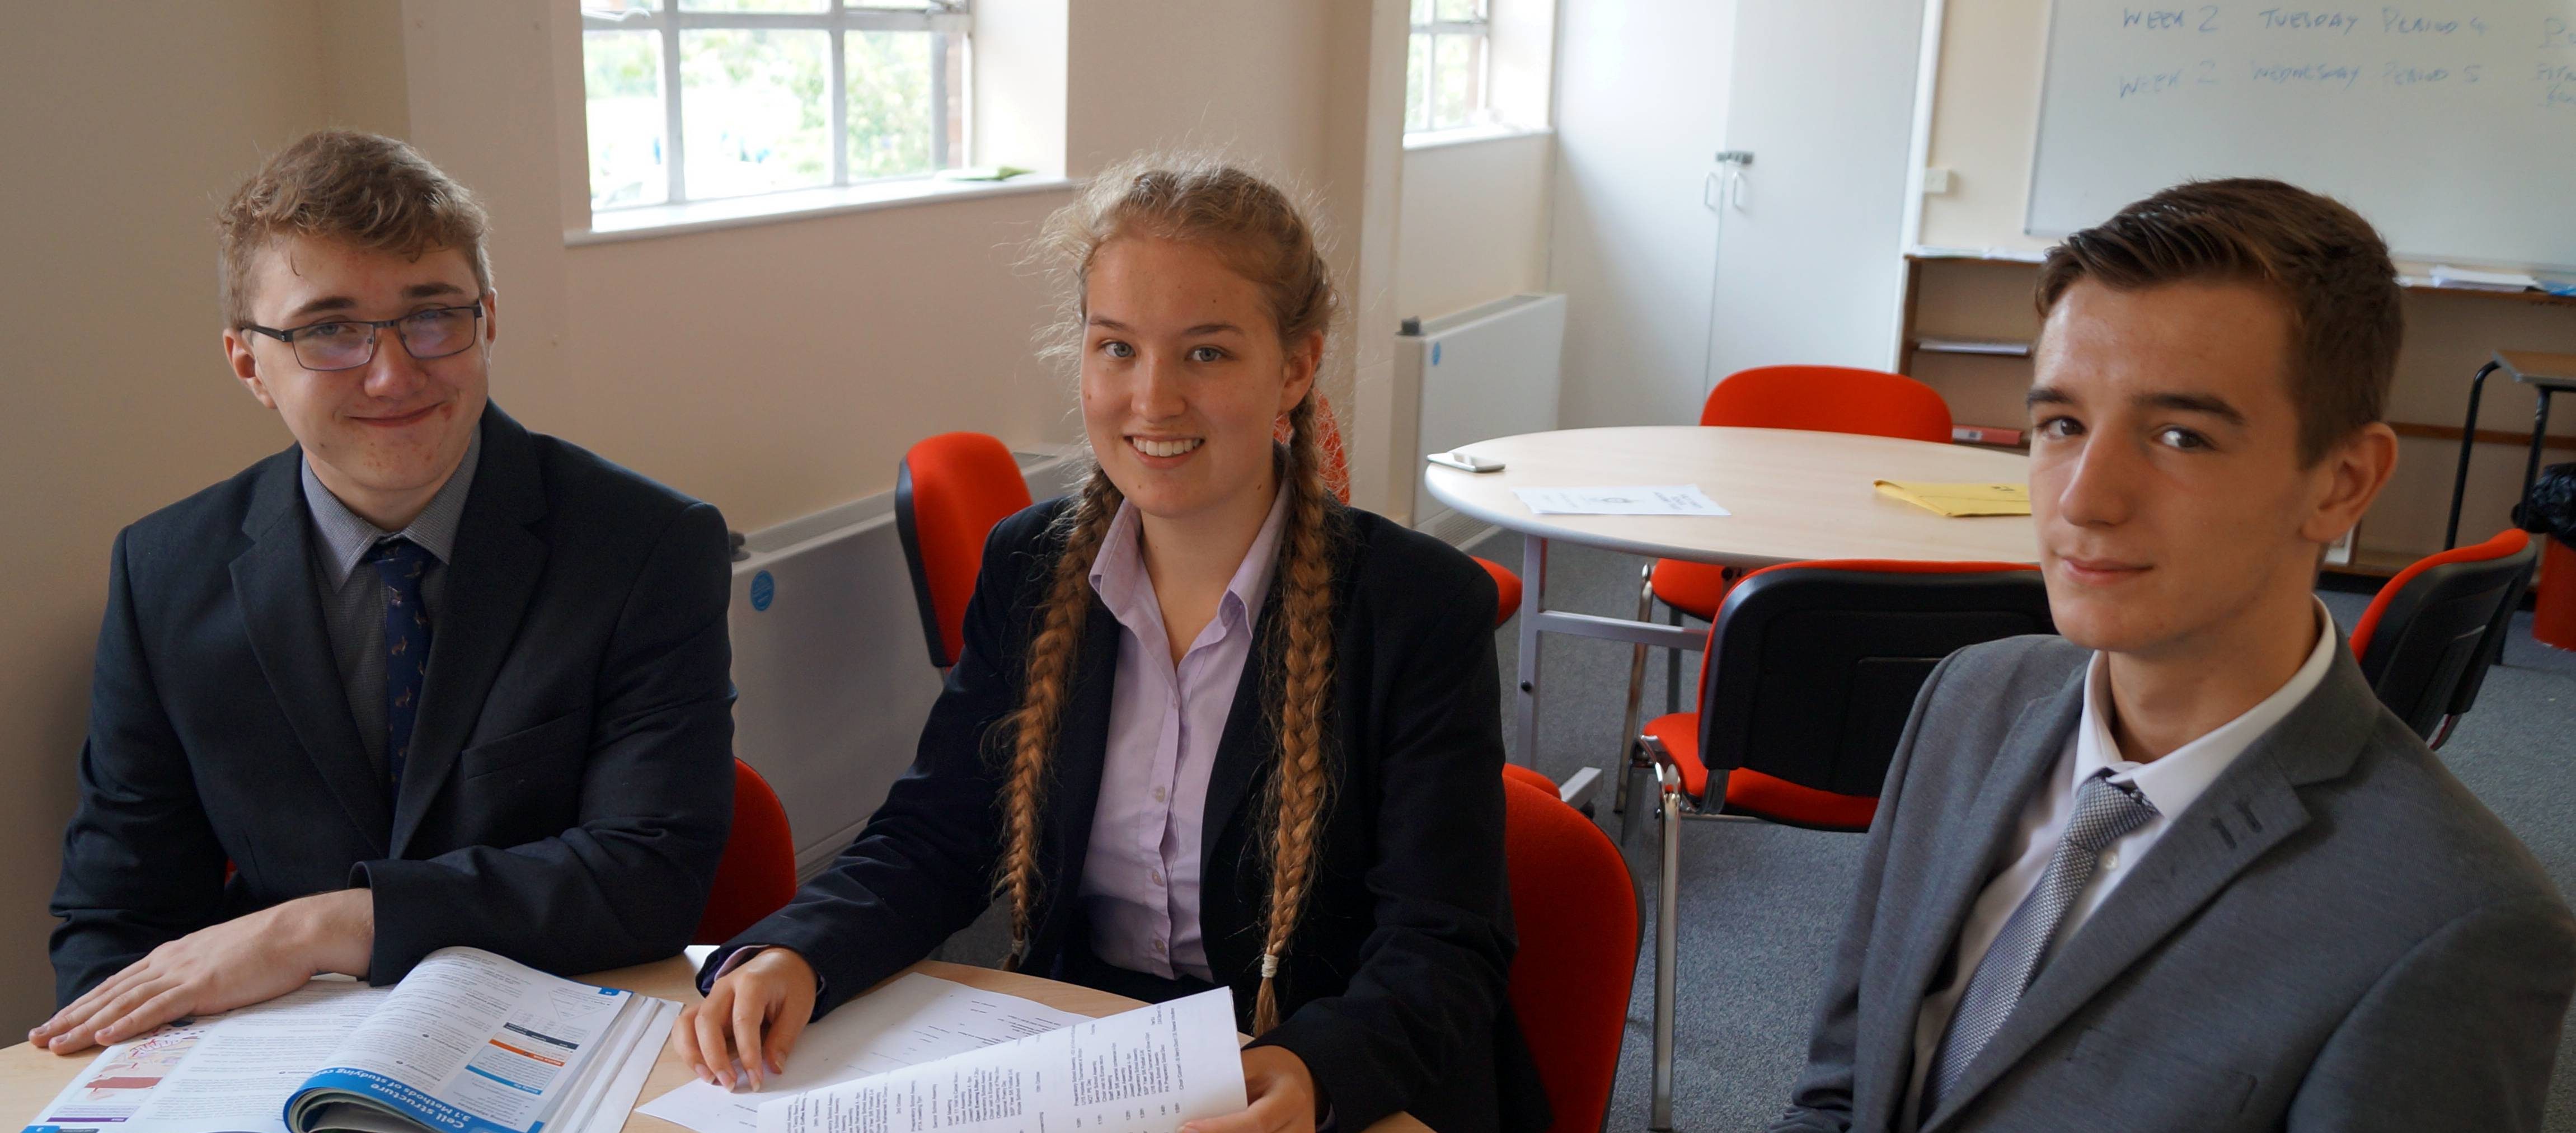 Sixth Form Open Evening at Holy Trinity School